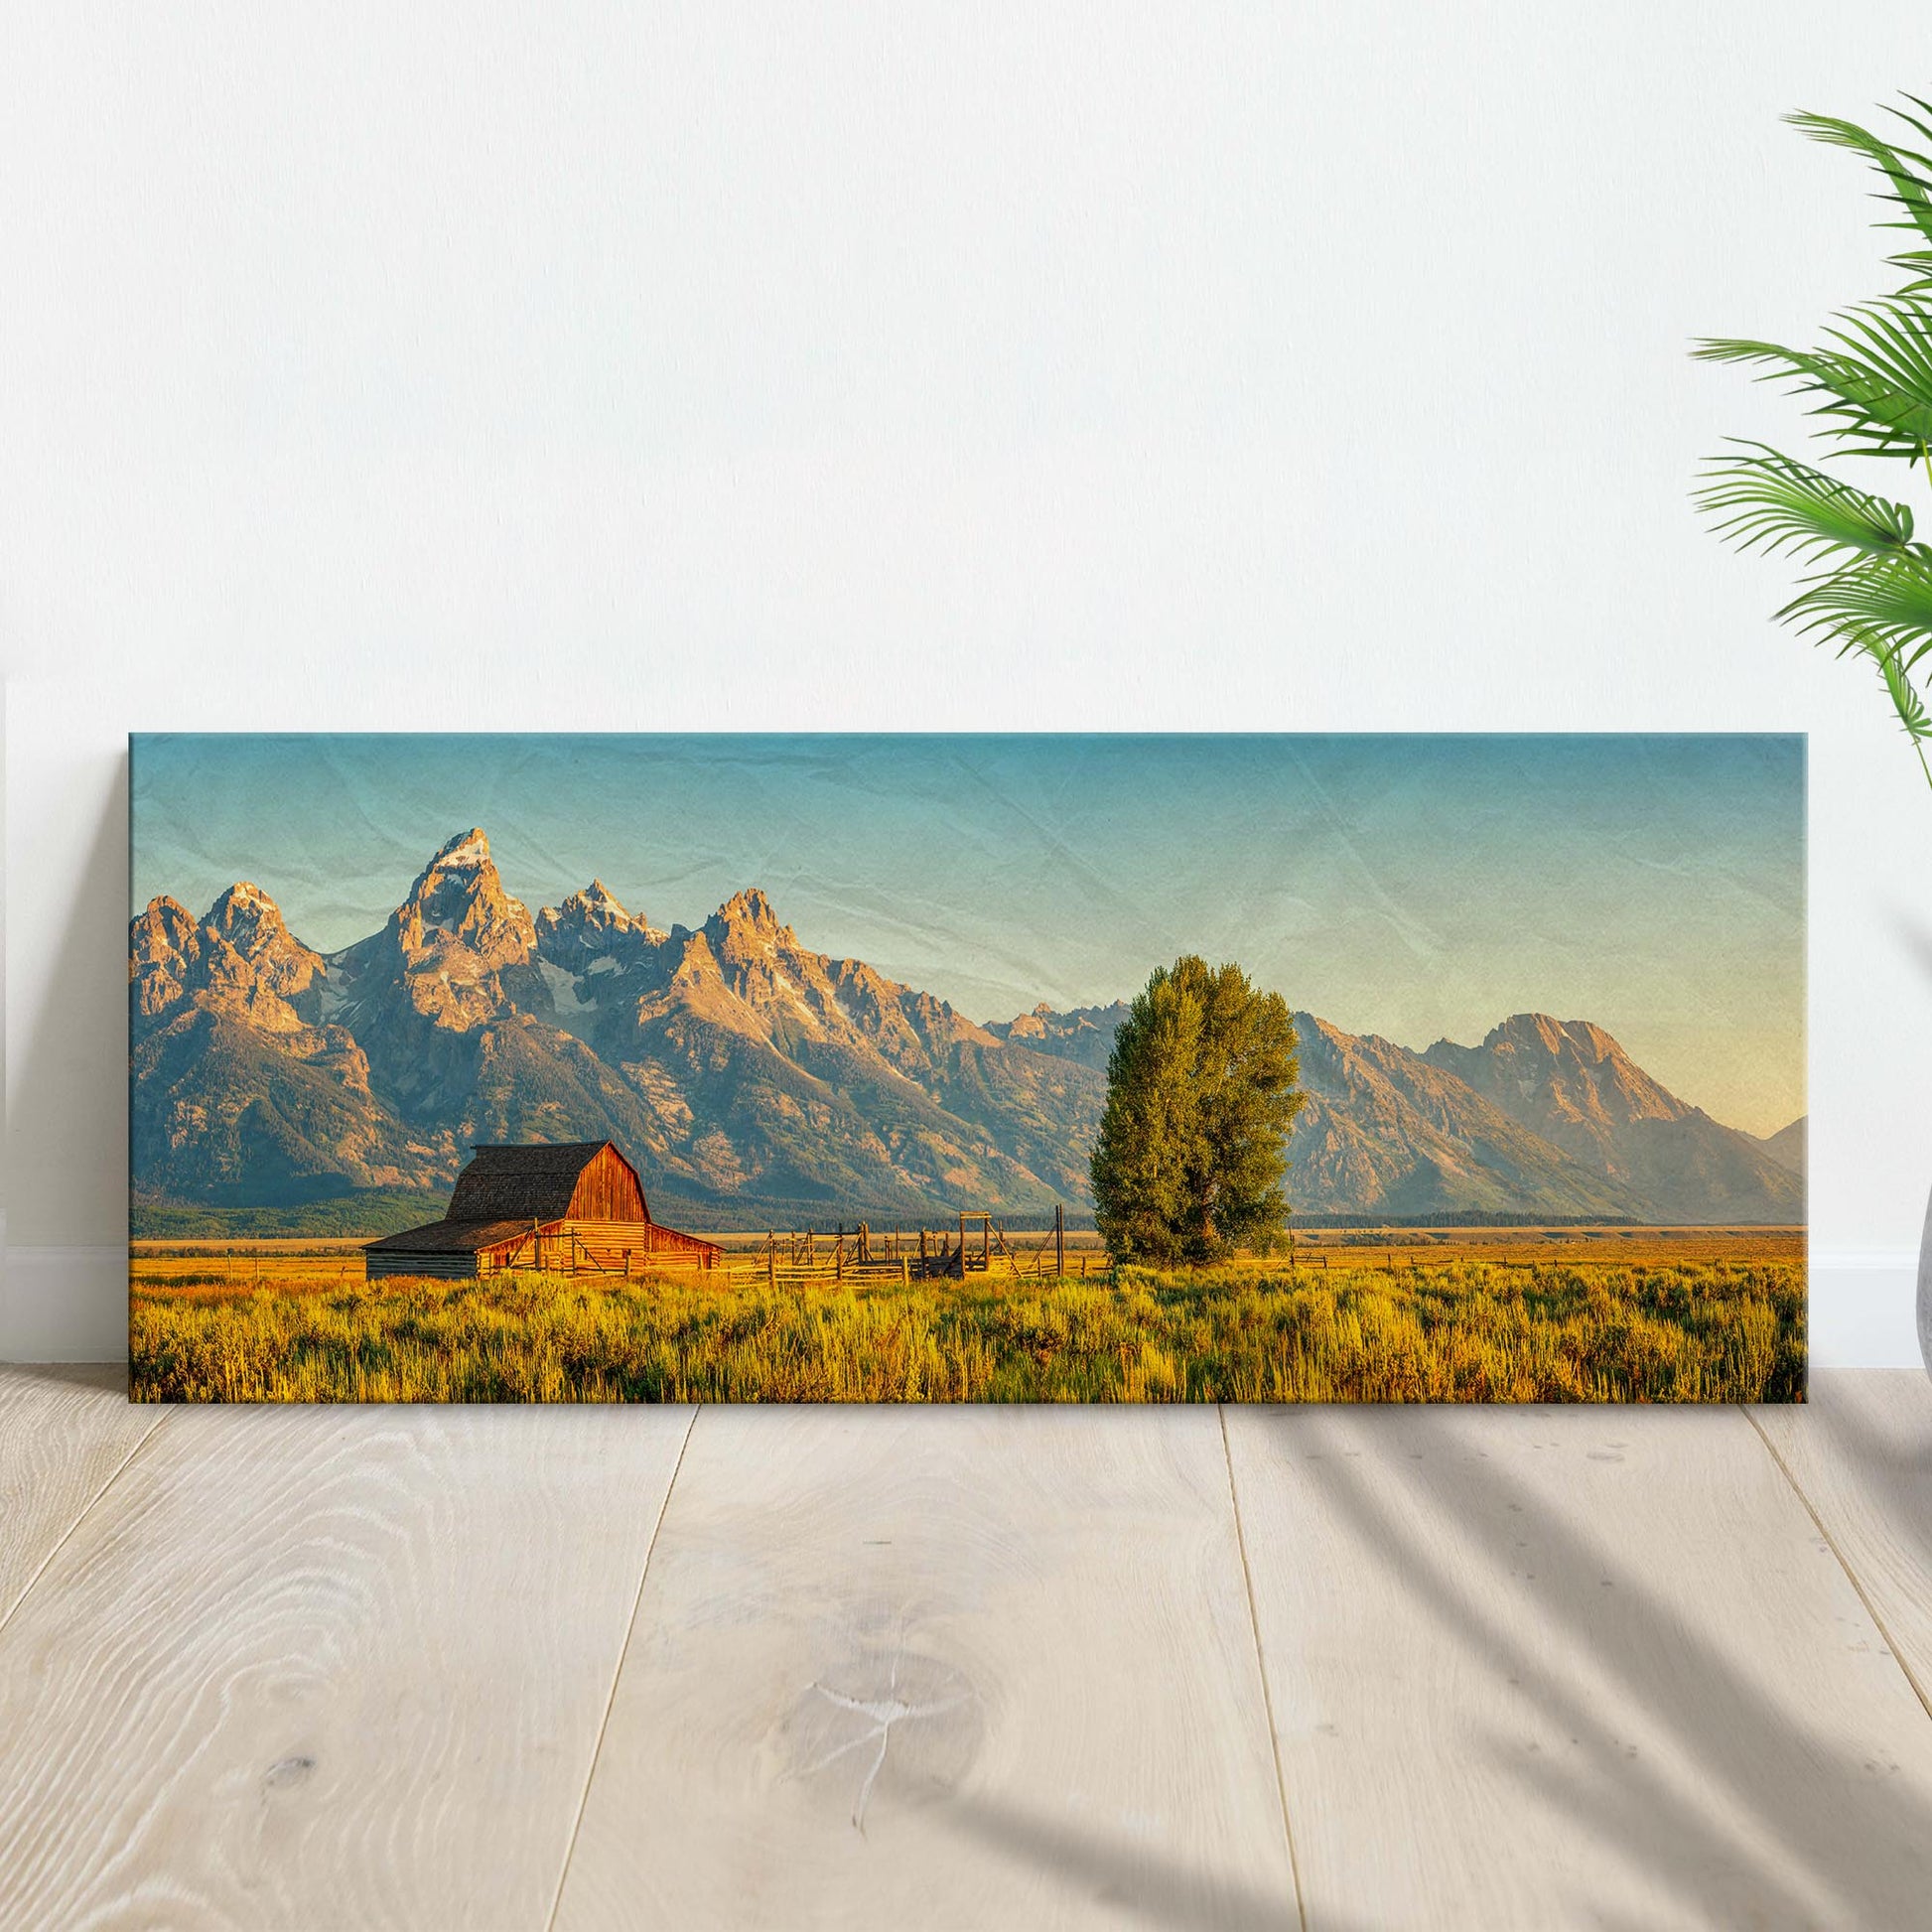 The Wild Frontier Of Grand Teton National Park Canvas Wall Art - Image by Tailored Canvases